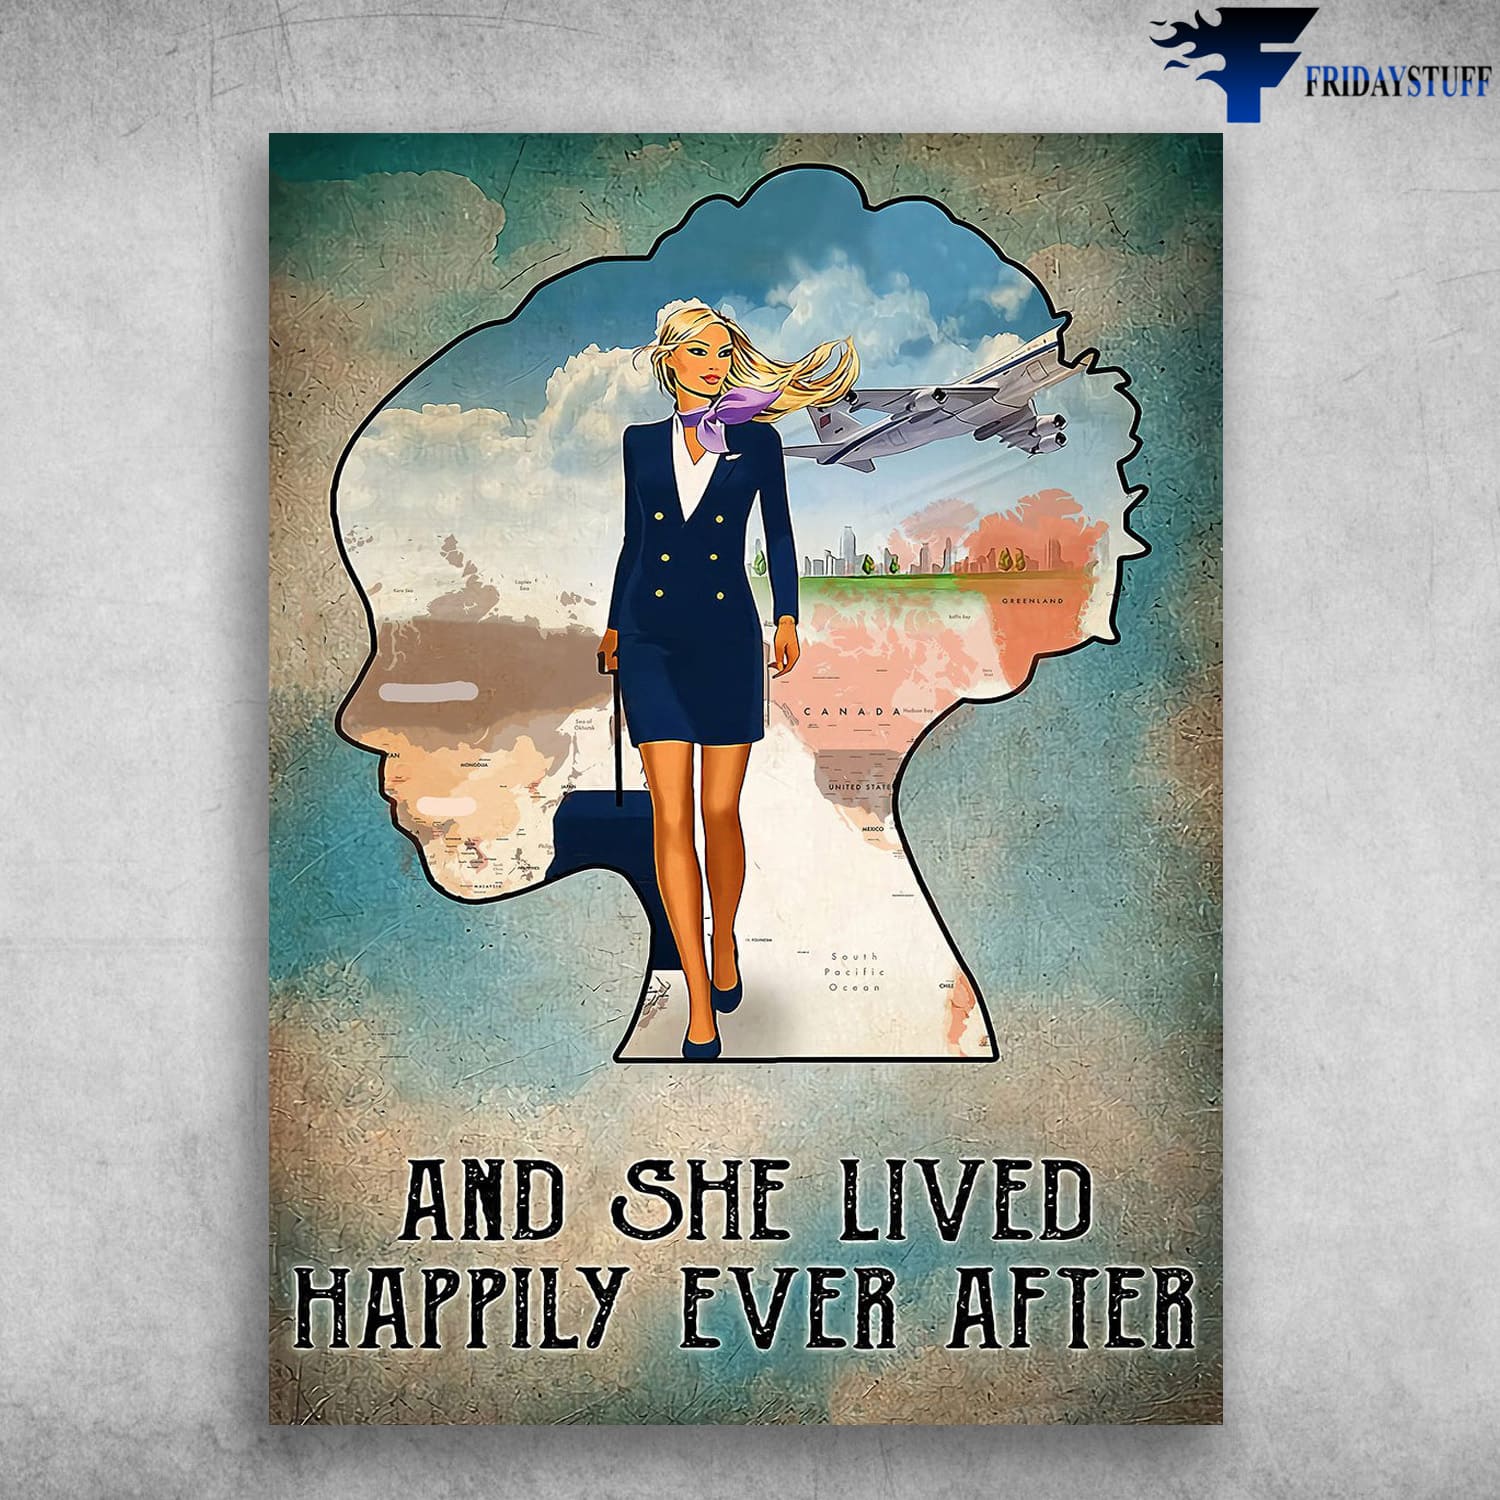 Flight Attendant, Flight Attendant Poster, And She Lived, Happily Ever After